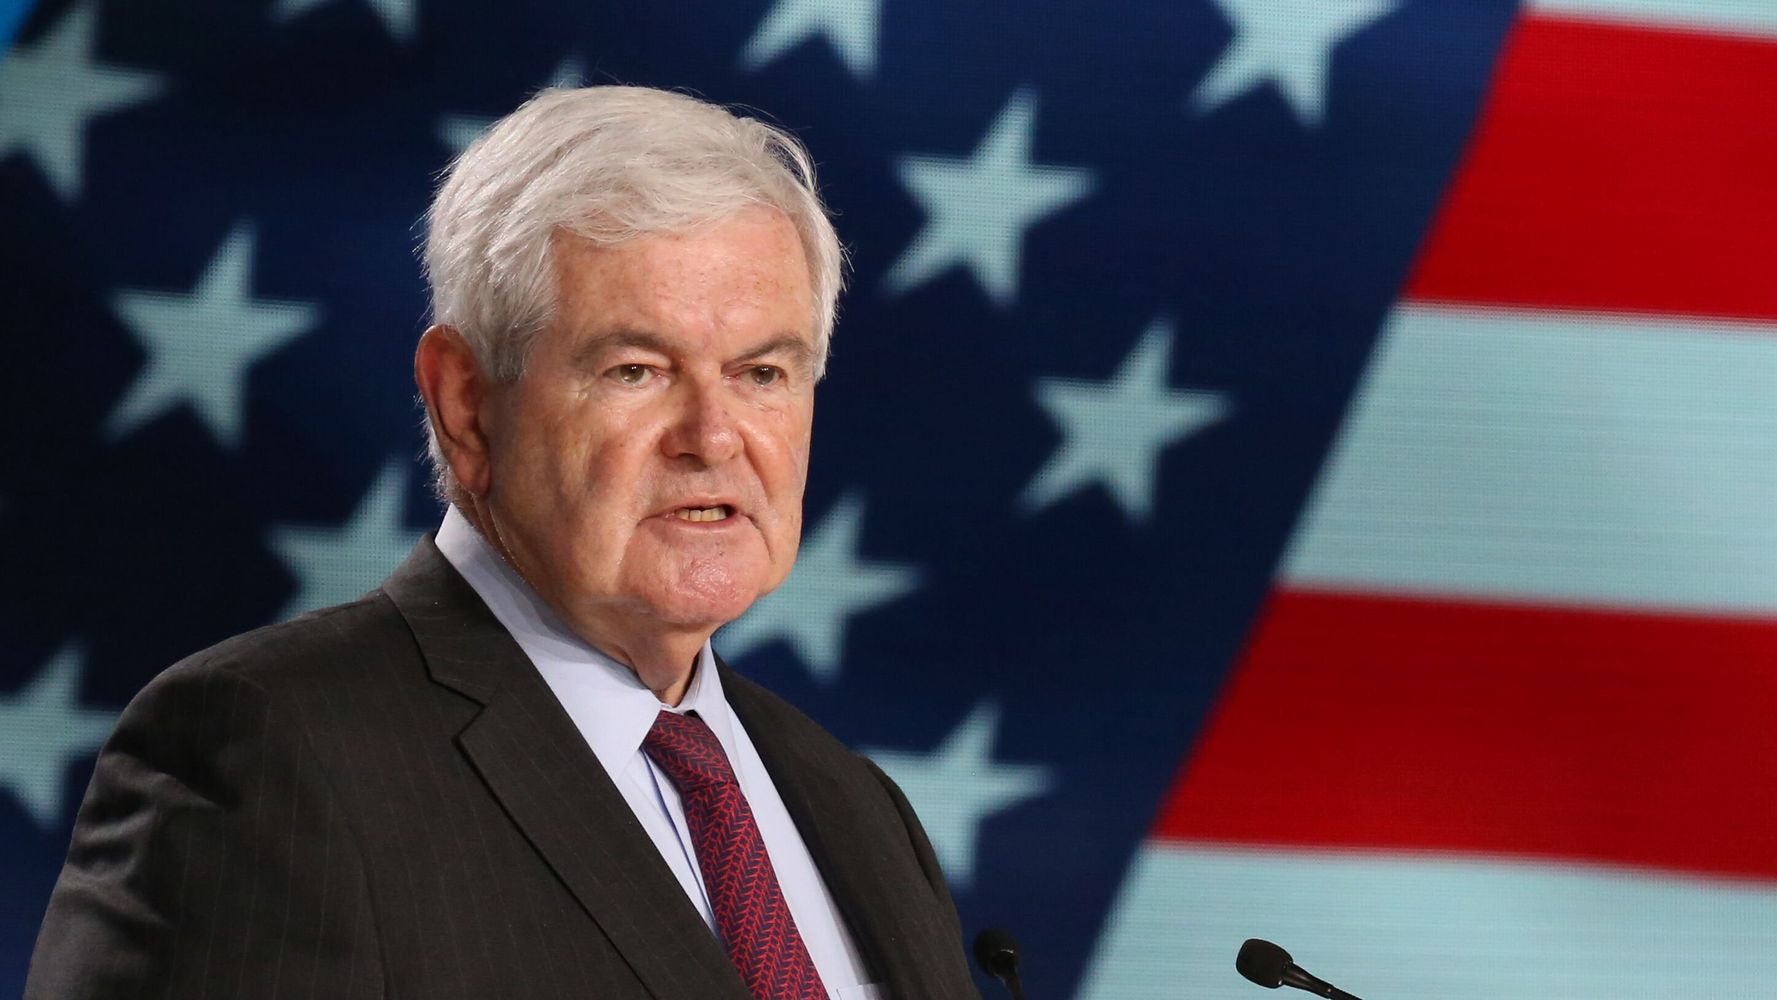 Republicans Mock Newt Gingrich Over Threat Of 'Jail' For Jan. 6 Panel